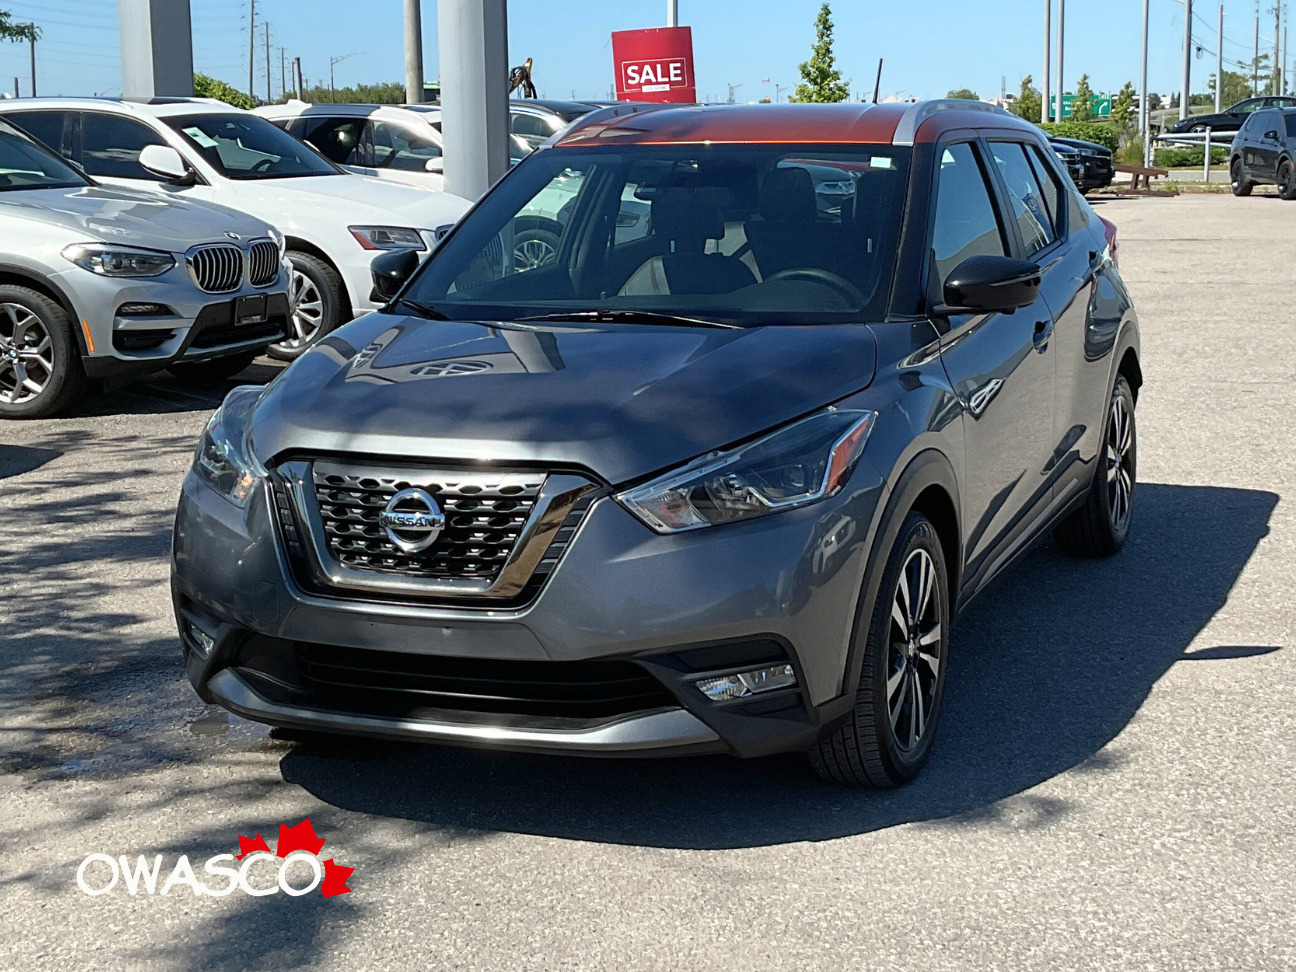 2019 Nissan Kicks 1.6L Locally Owned! Clean CarFax!